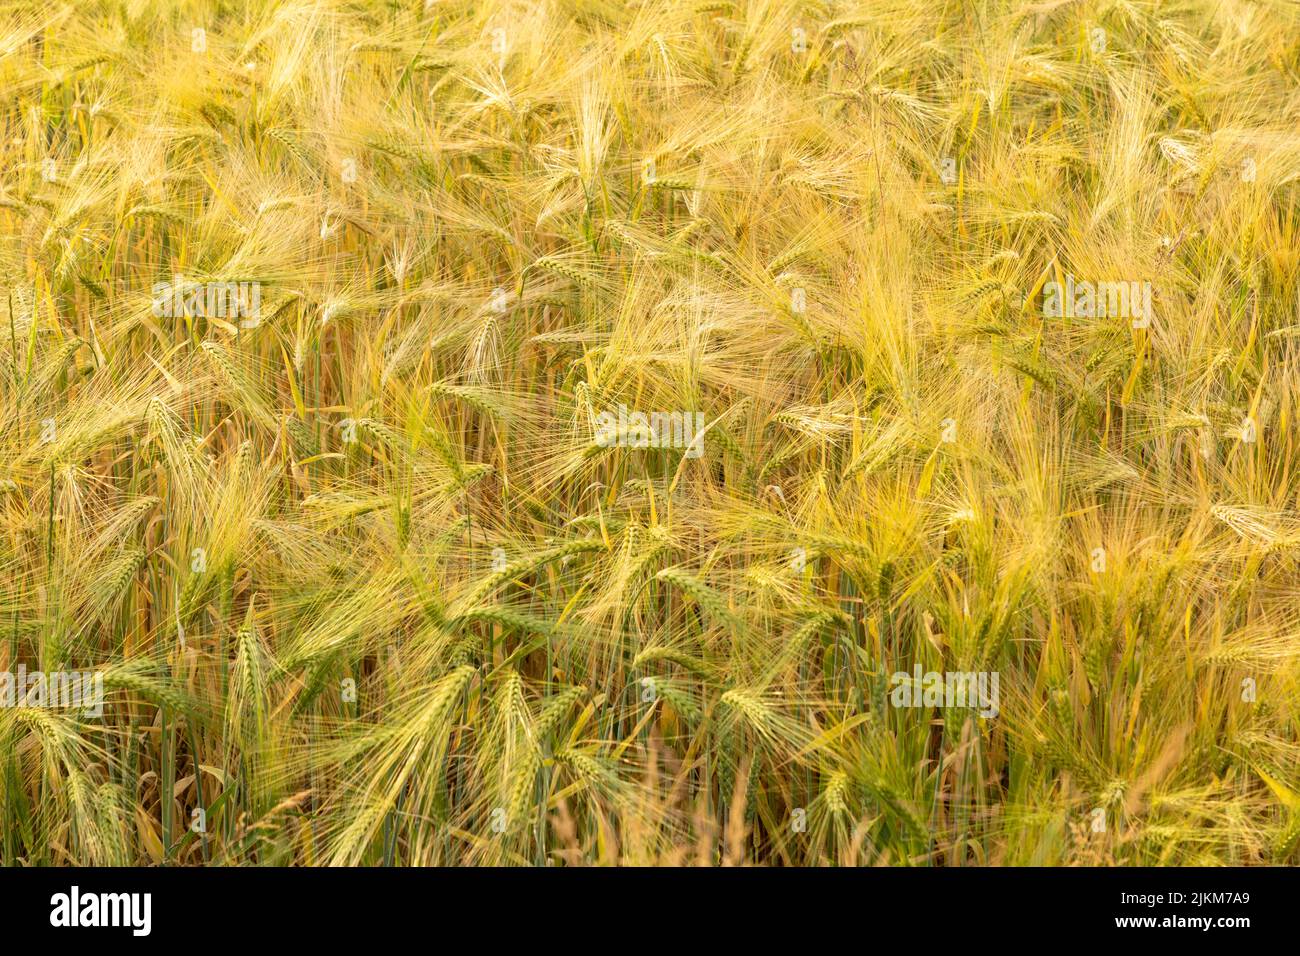 field with barley Stock Photo